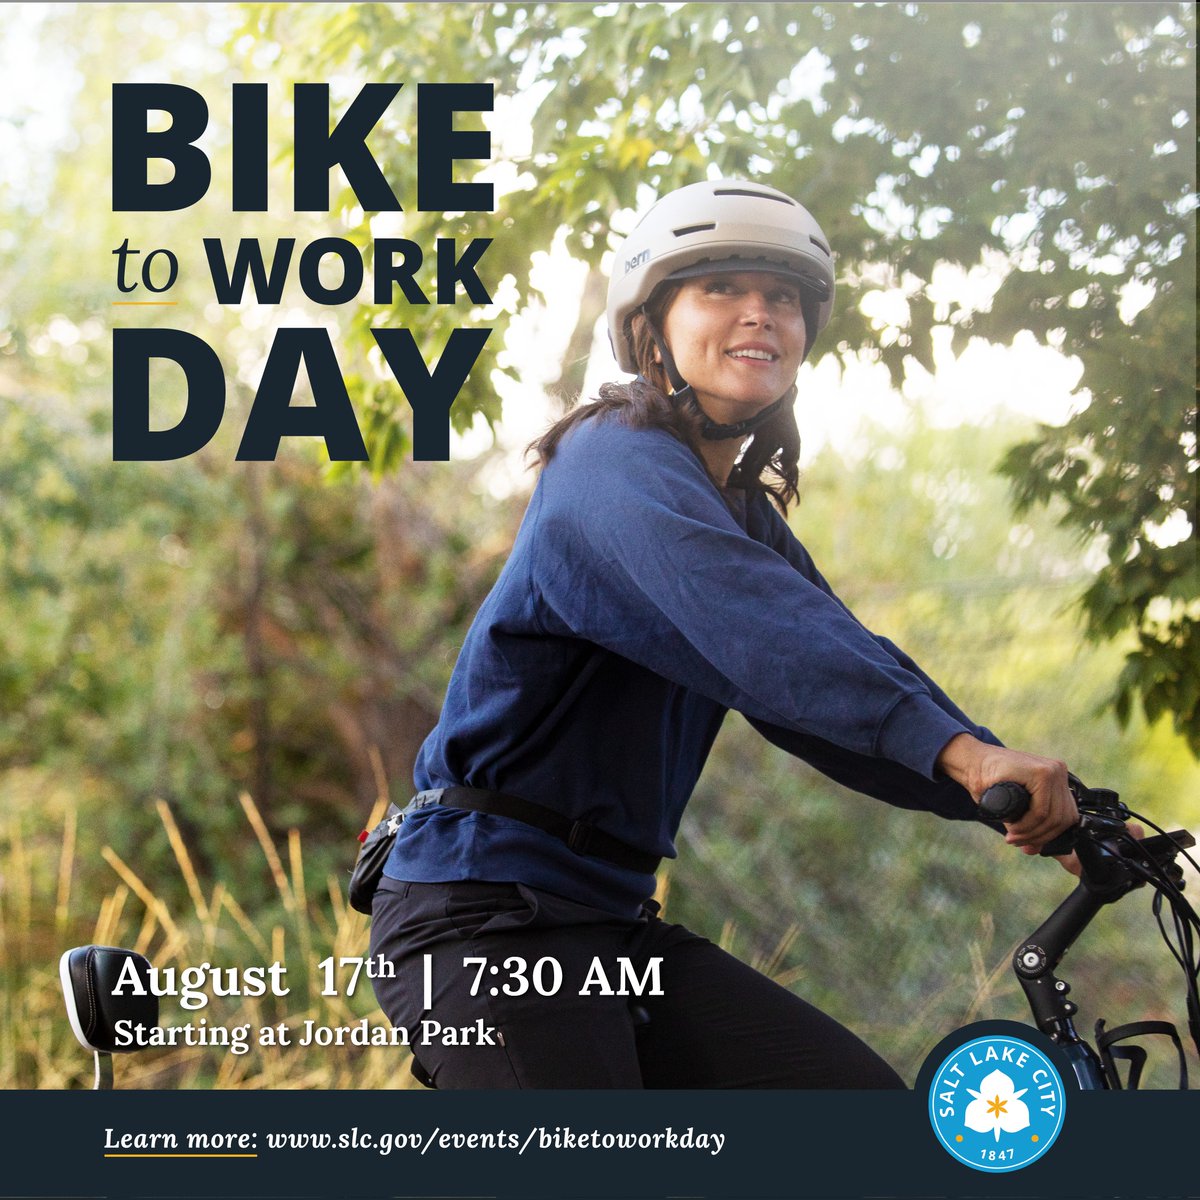 Join Mayor Mendenhall & SLC employees as we pedal our way to work on Aug 17th, 7:30 AM from Jordan Park! 

#BikeToWorkSLC #EcoFriendlyCommute #GetMovingSLC 

Link below for more details.

bit.ly/3VCkqR1